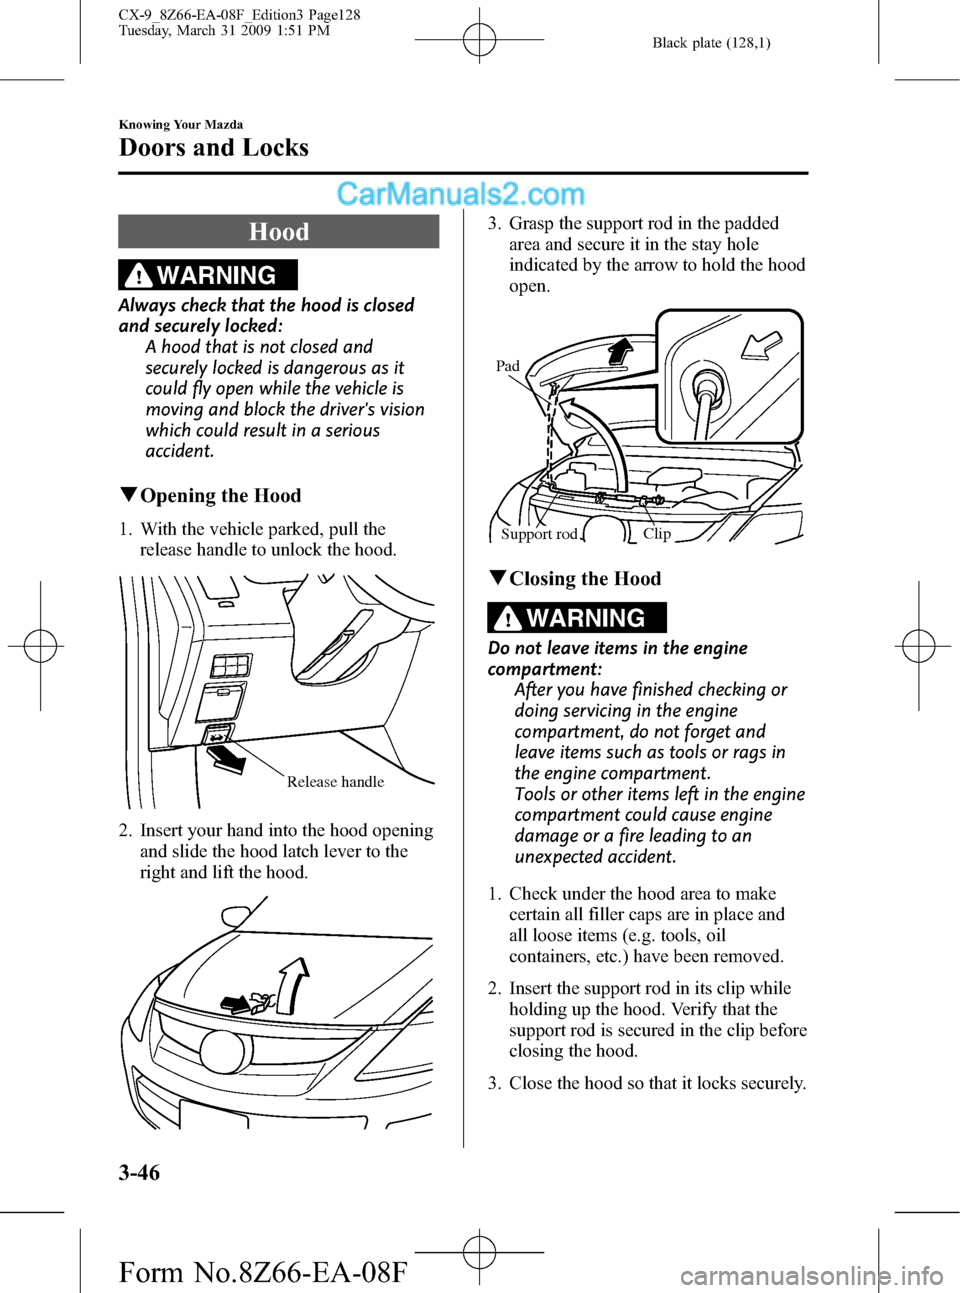 MAZDA MODEL CX-9 2009  Owners Manual (in English) Black plate (128,1)
Hood
WARNING
Always check that the hood is closed
and securely locked:
A hood that is not closed and
securely locked is dangerous as it
could fly open while the vehicle is
moving a